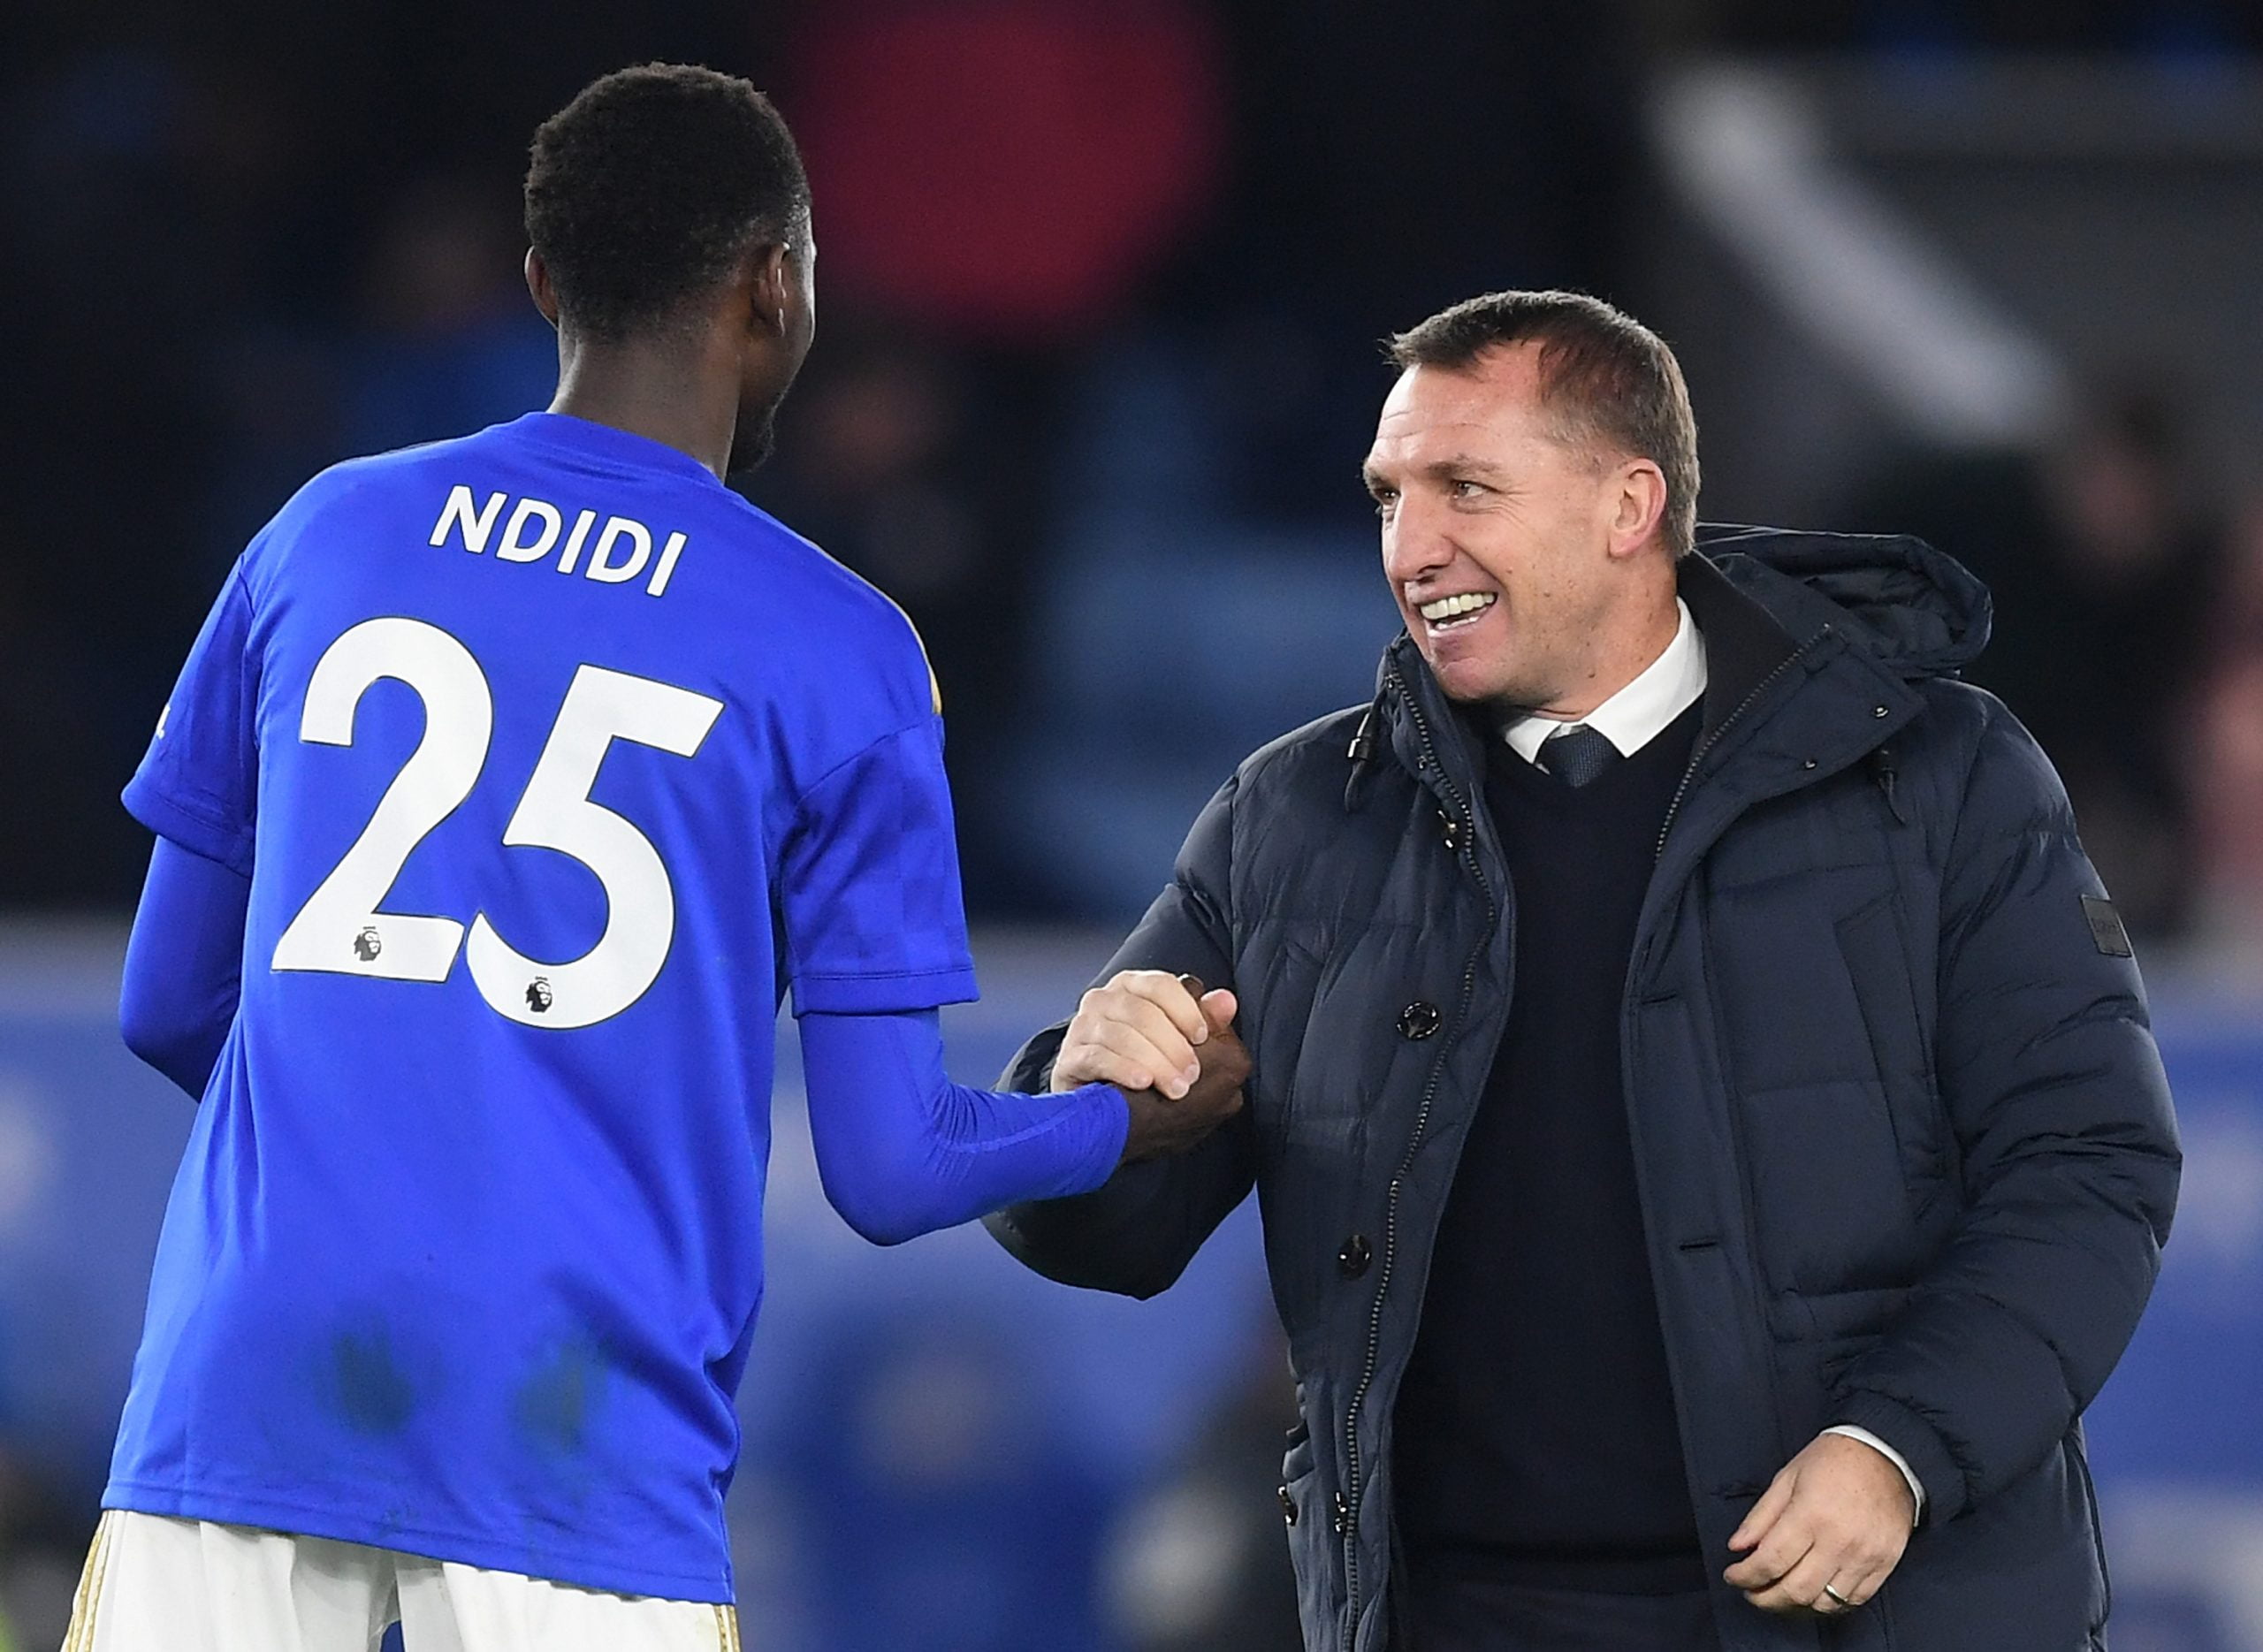 LEICESTER, ENGLAND - JANUARY 04: Brendan Rodgers, Manager of Leicester City celebrates with Wilfred Ndidi of Leicester City following the FA Cup Third Round match between Leicester City and Wigan Athletic at The King Power Stadium on January 04, 2020 in Leicester, England. (Photo by Michael Regan/Getty Images)